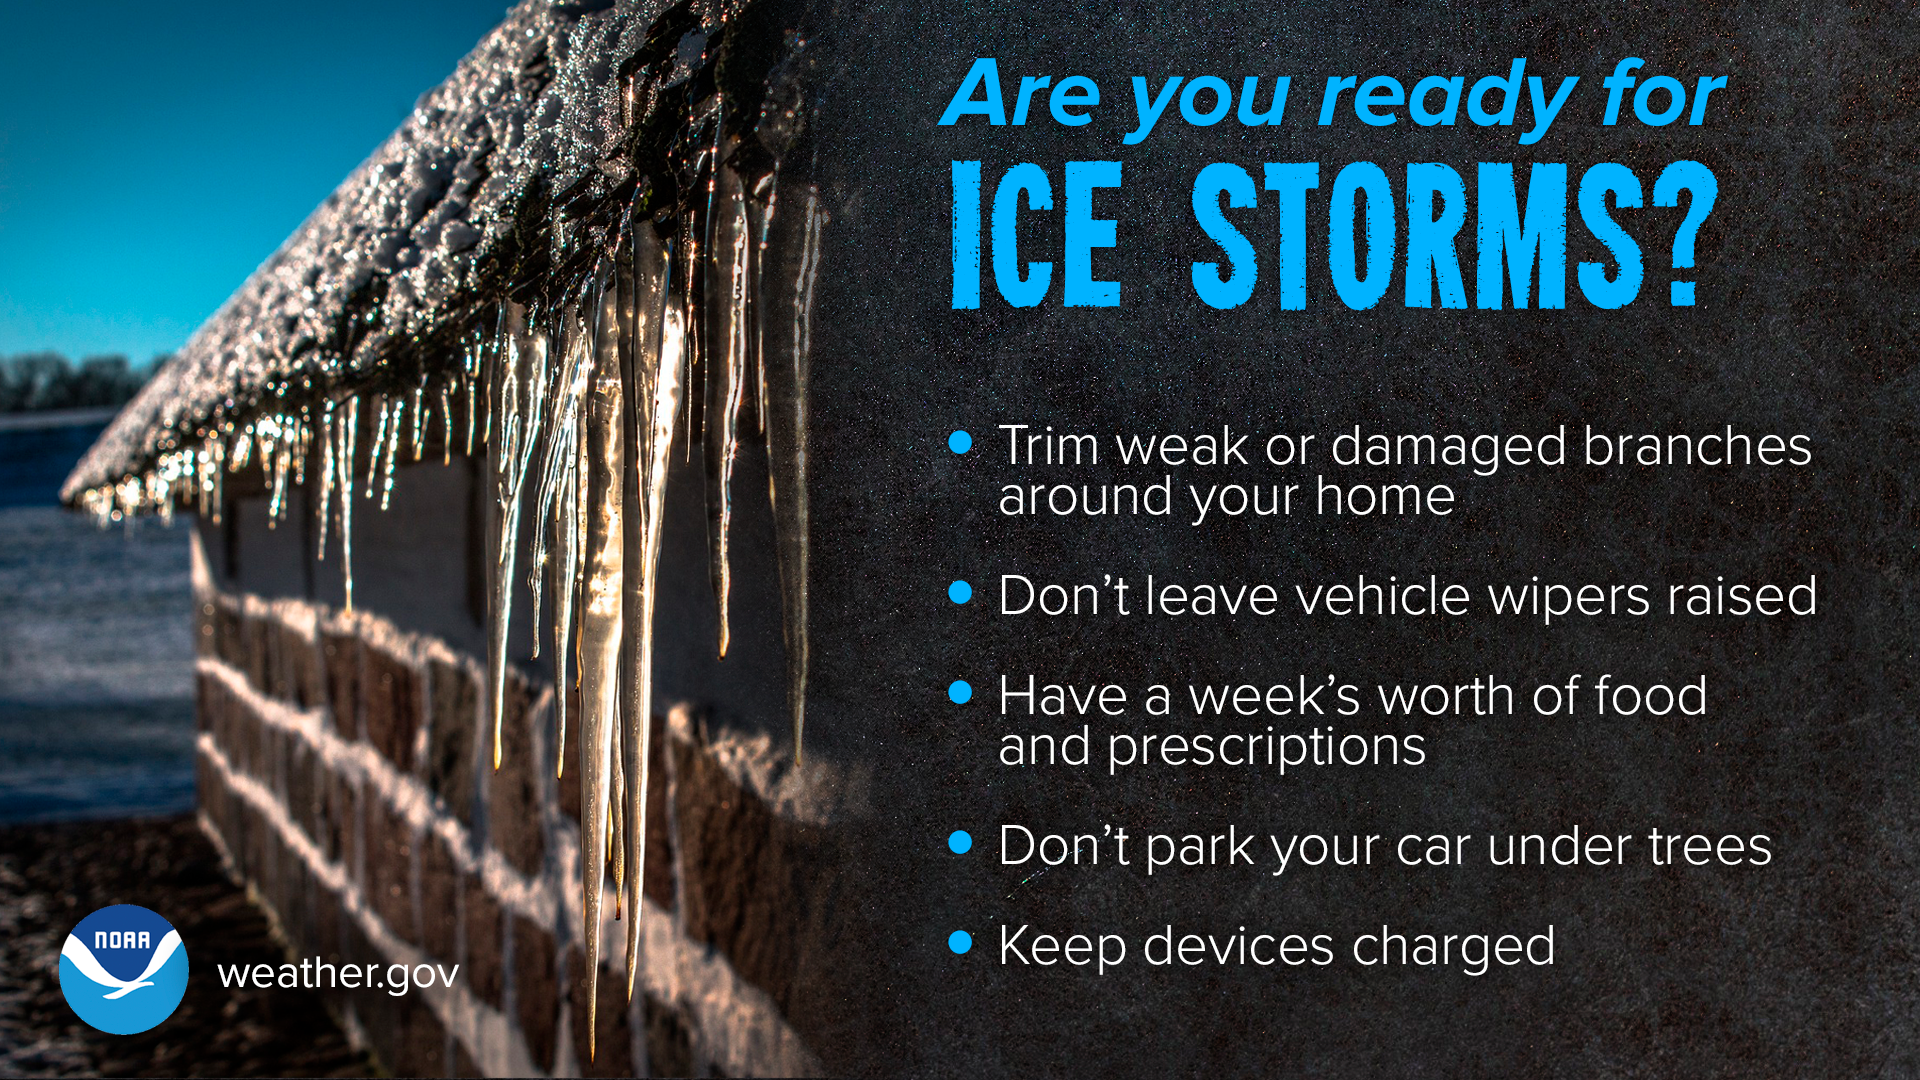 Are you ready for ice storms? Trim weak or damaged branches around your home. Don't leave vehicle wipers raised. Have a week's worth of food and prescriptions. Don't park your car under trees. Keep devices charged.